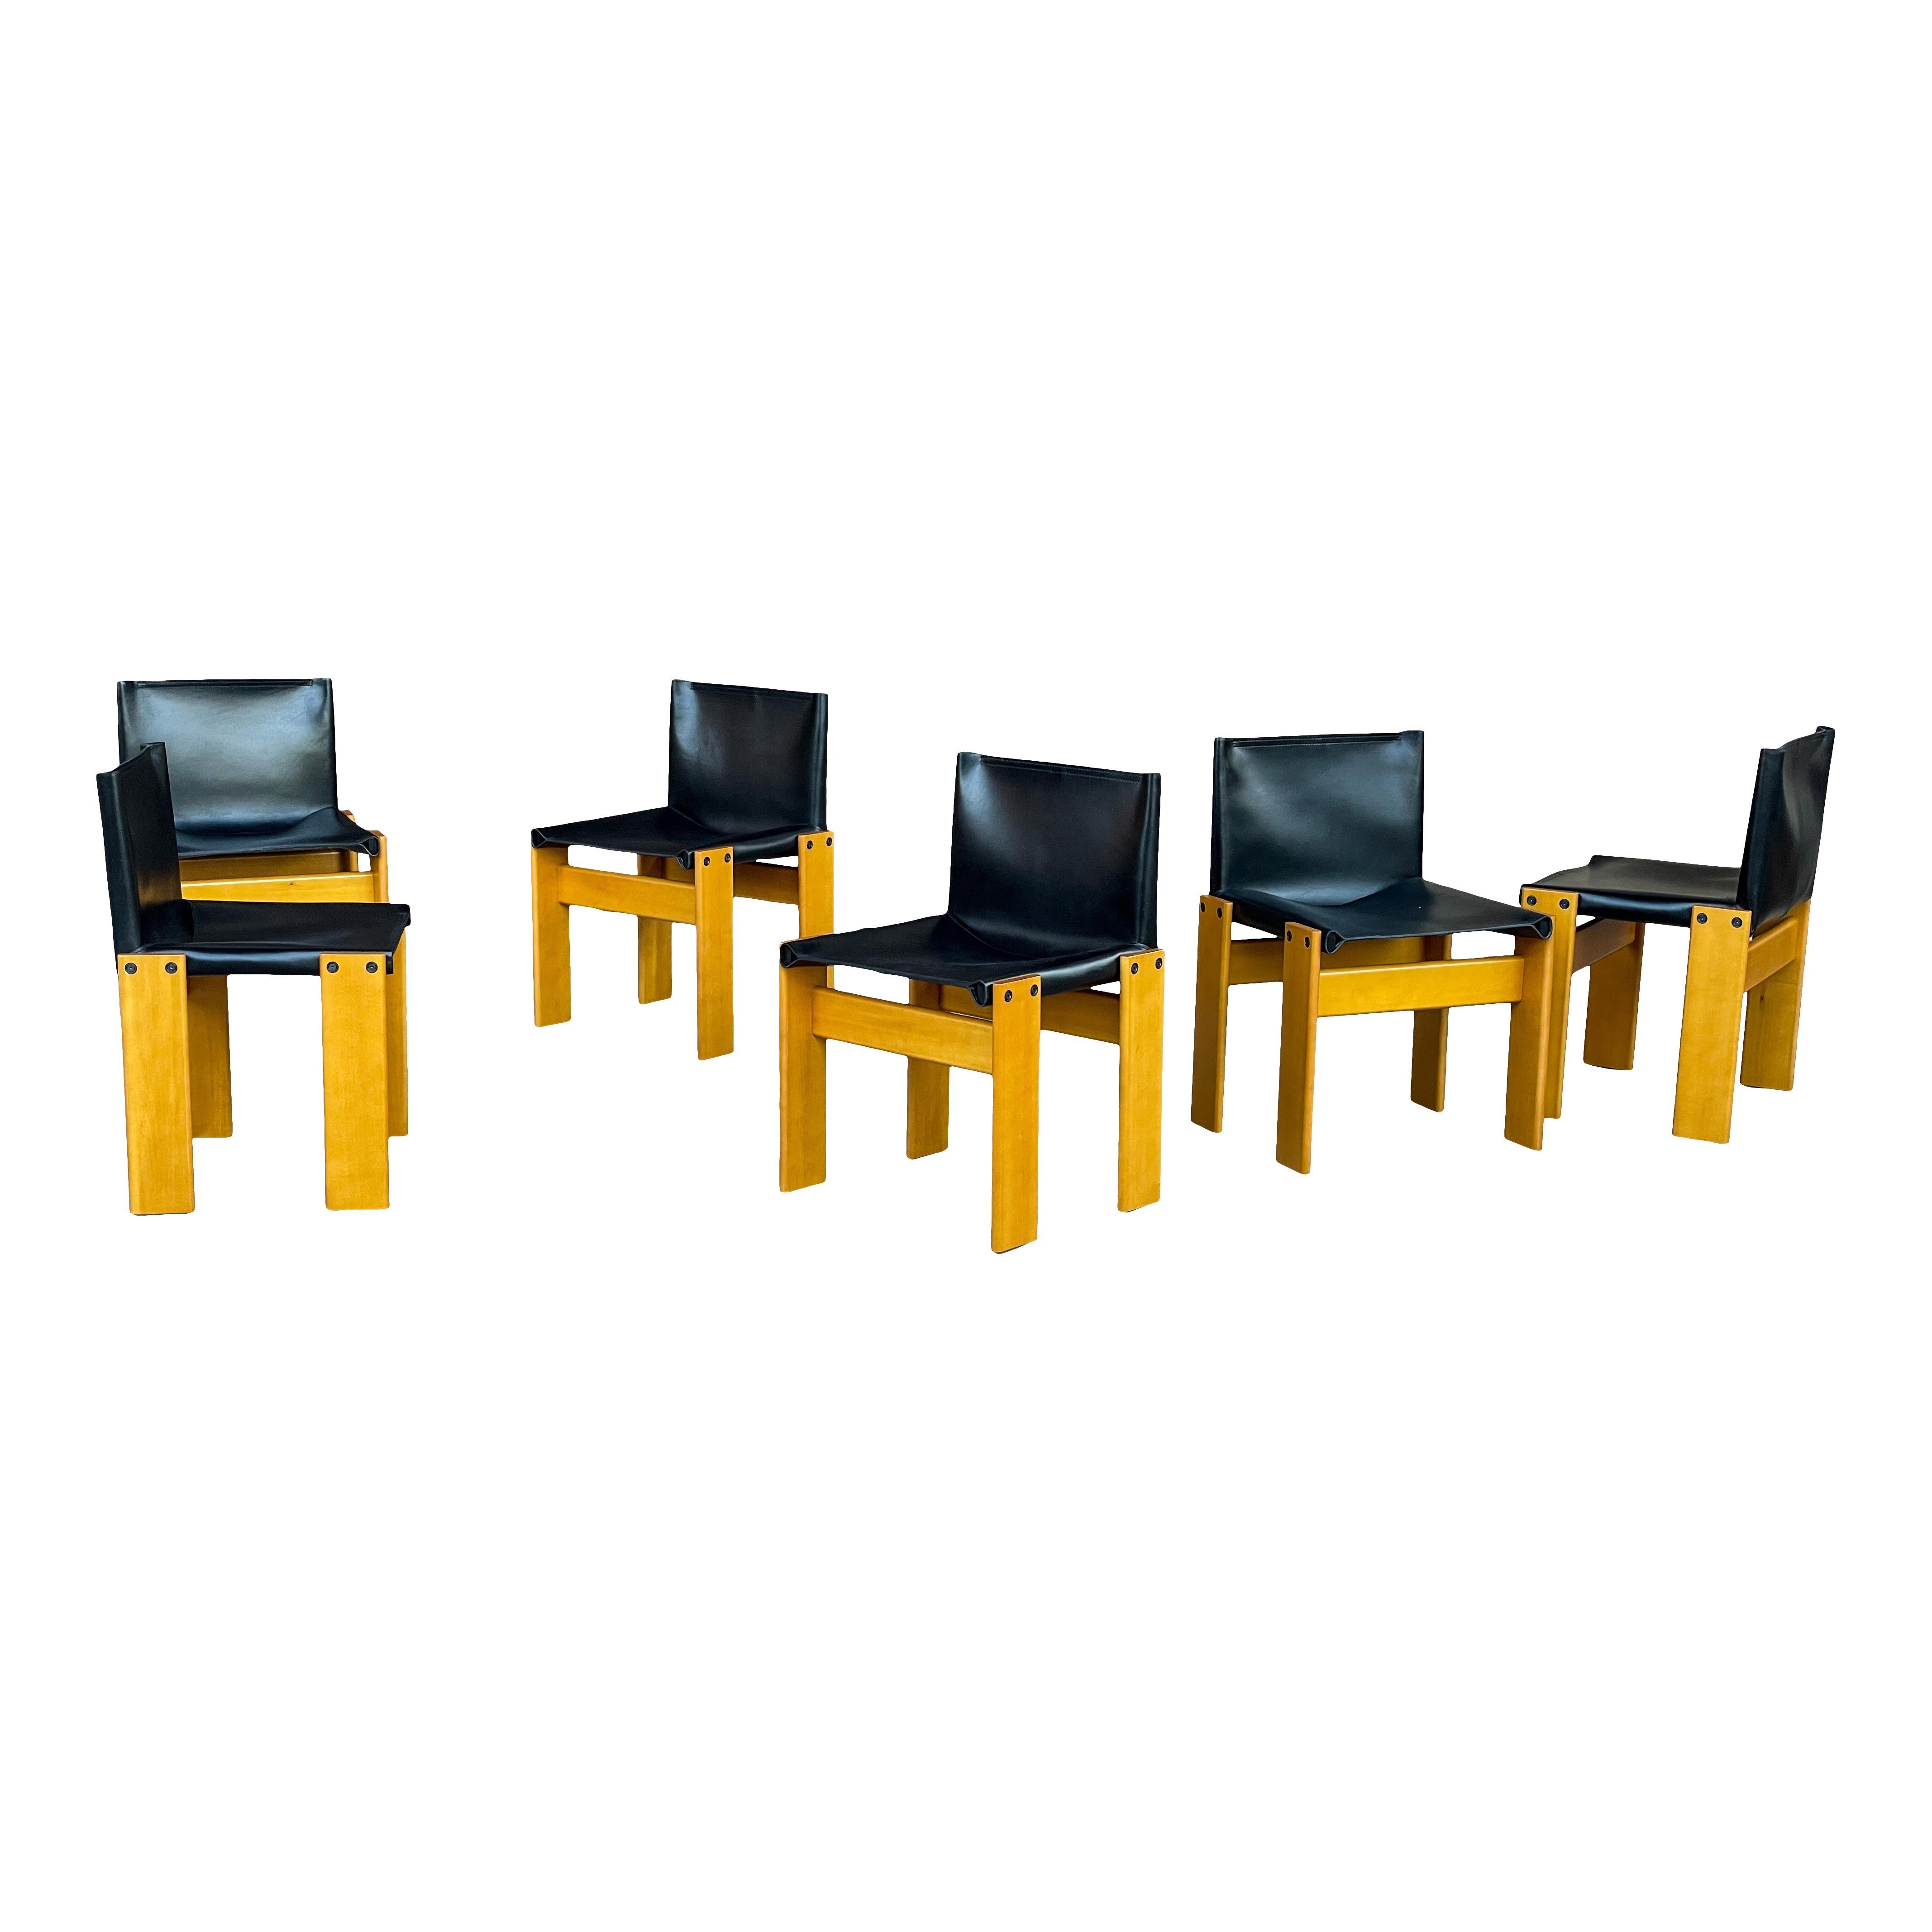 Set of eight “Monk” dining chairs designed by Afra and Tobia Scarpa for Molteni in 1973.
Made of black leather and ash wood.
Fully restored in Italy.

Interesting is the ‘flat’ shape of this chair where the designer has chosen to place the legs